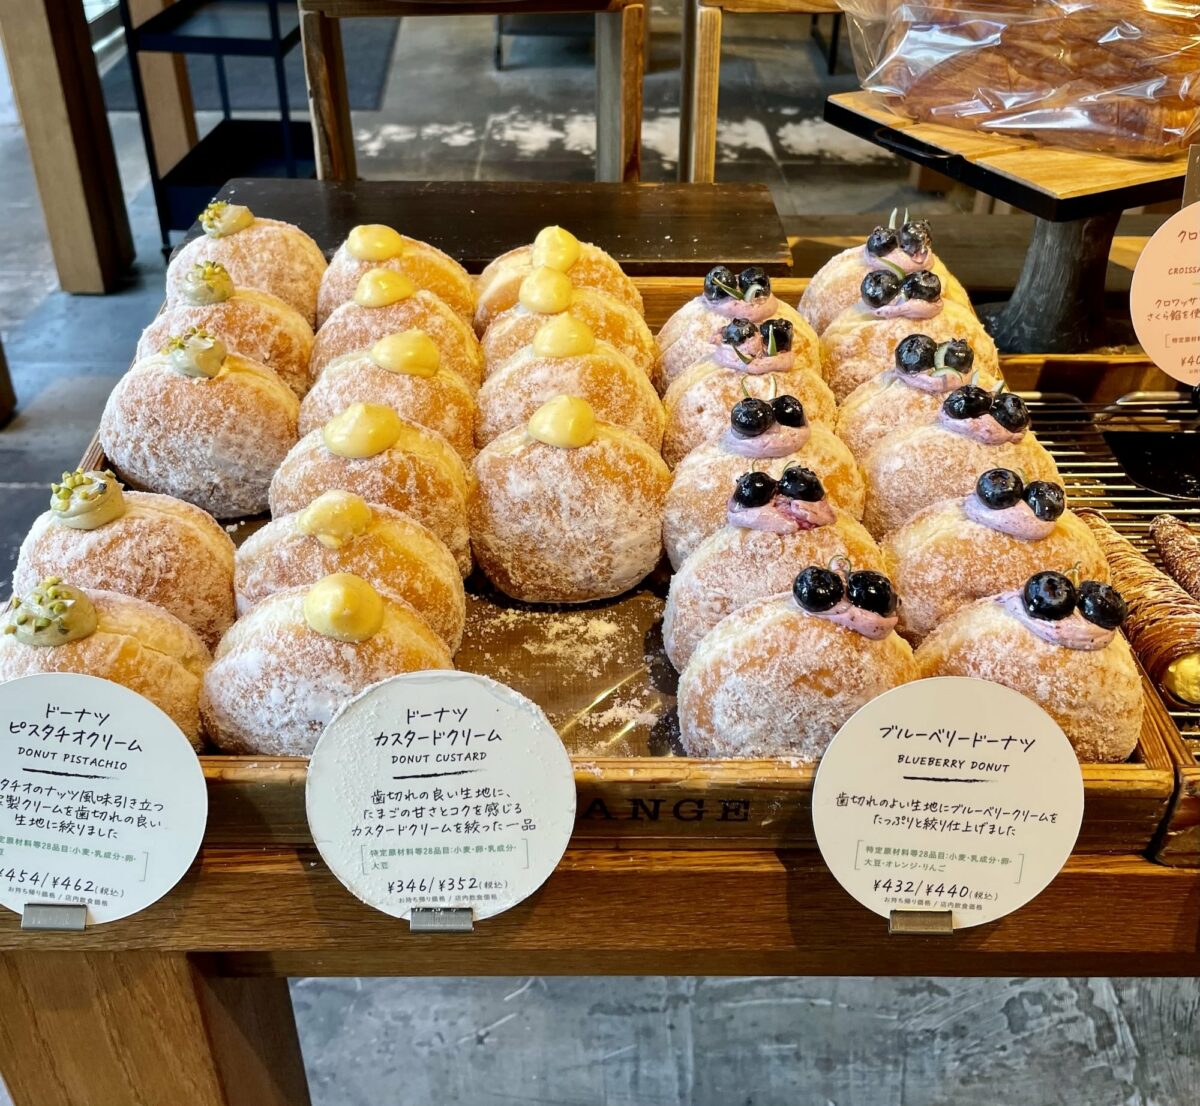 A display of cream-filled doughnuts topped with berries and dusted with powdered sugar on a tray in a Fukuoka bakery.